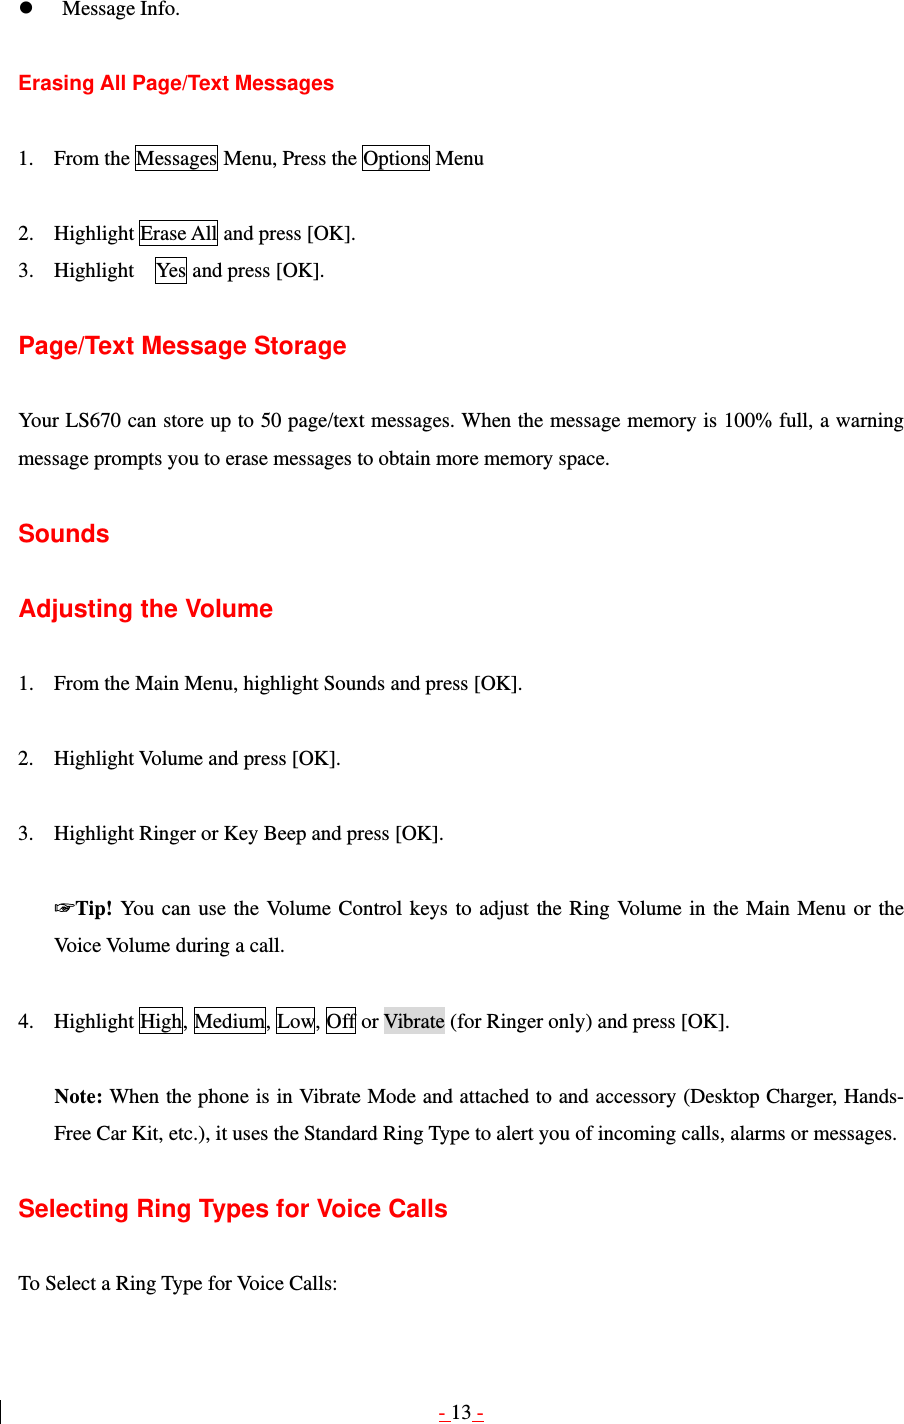 - 13 -   Message Info.  Erasing All Page/Text Messages  1. From the Messages Menu, Press the Options Menu  2. Highlight Erase All and press [OK]. 3. Highlight    Yes and press [OK].  Page/Text Message Storage  Your LS670 can store up to 50 page/text messages. When the message memory is 100% full, a warning message prompts you to erase messages to obtain more memory space.  Sounds  Adjusting the Volume  1. From the Main Menu, highlight Sounds and press [OK].  2. Highlight Volume and press [OK].  3. Highlight Ringer or Key Beep and press [OK].  ☞Tip! You can use the Volume Control keys to adjust the Ring Volume in the Main Menu or the Voice Volume during a call.  4. Highlight High, Medium, Low, Off or Vibrate (for Ringer only) and press [OK].  Note: When the phone is in Vibrate Mode and attached to and accessory (Desktop Charger, Hands-Free Car Kit, etc.), it uses the Standard Ring Type to alert you of incoming calls, alarms or messages.  Selecting Ring Types for Voice Calls  To Select a Ring Type for Voice Calls: 